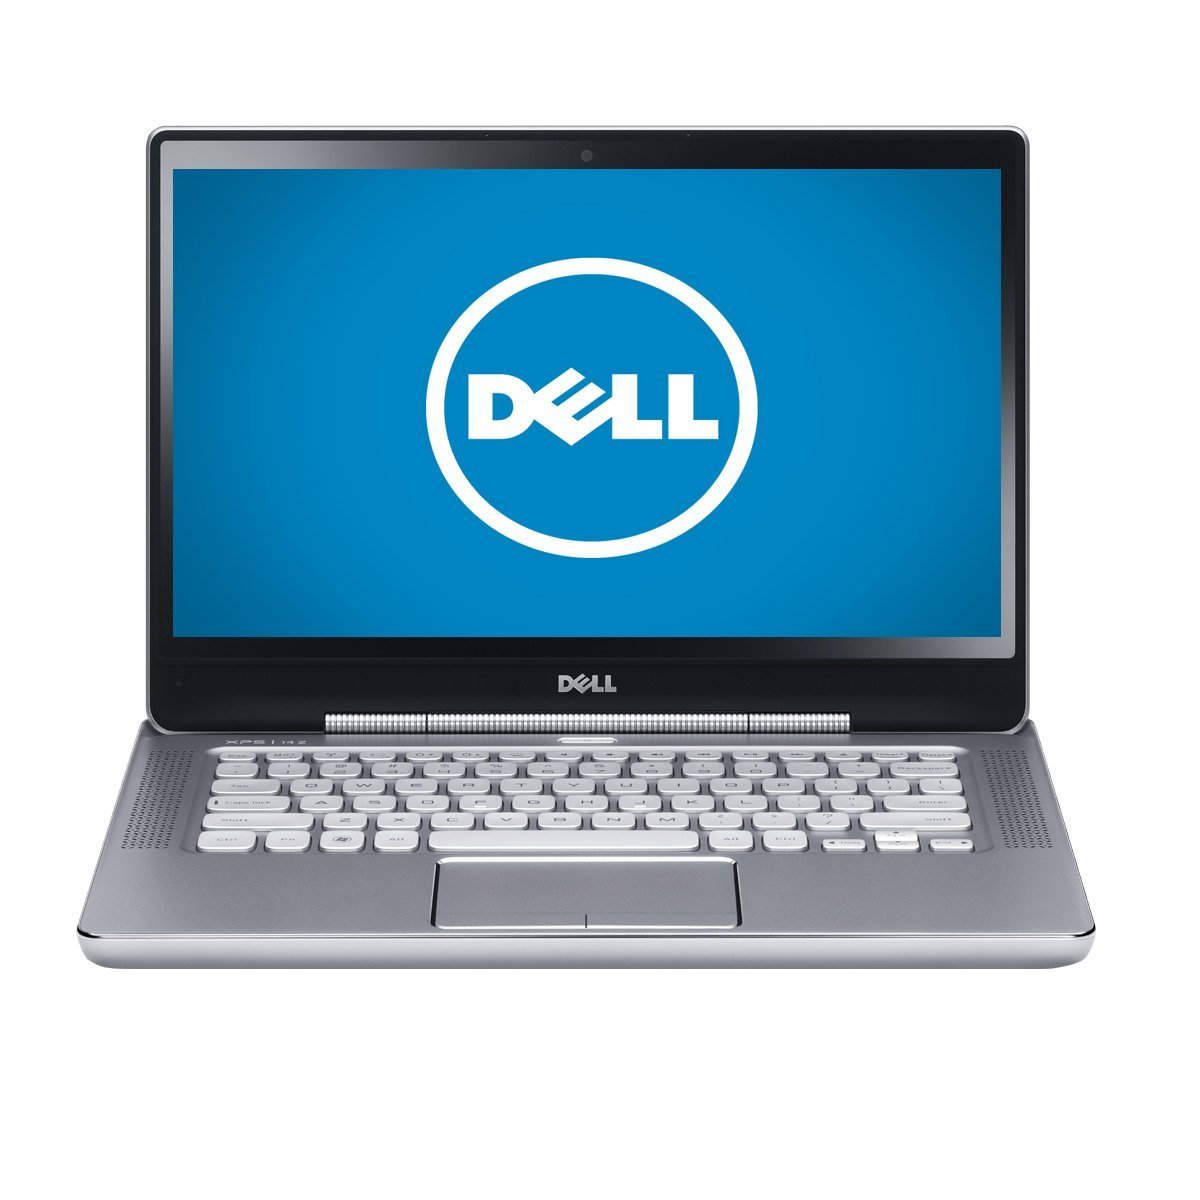 http://thetechjournal.com/wp-content/uploads/images/1203/1331359094-dell-xps-x14z3846slv-14inch-laptop--5.jpg